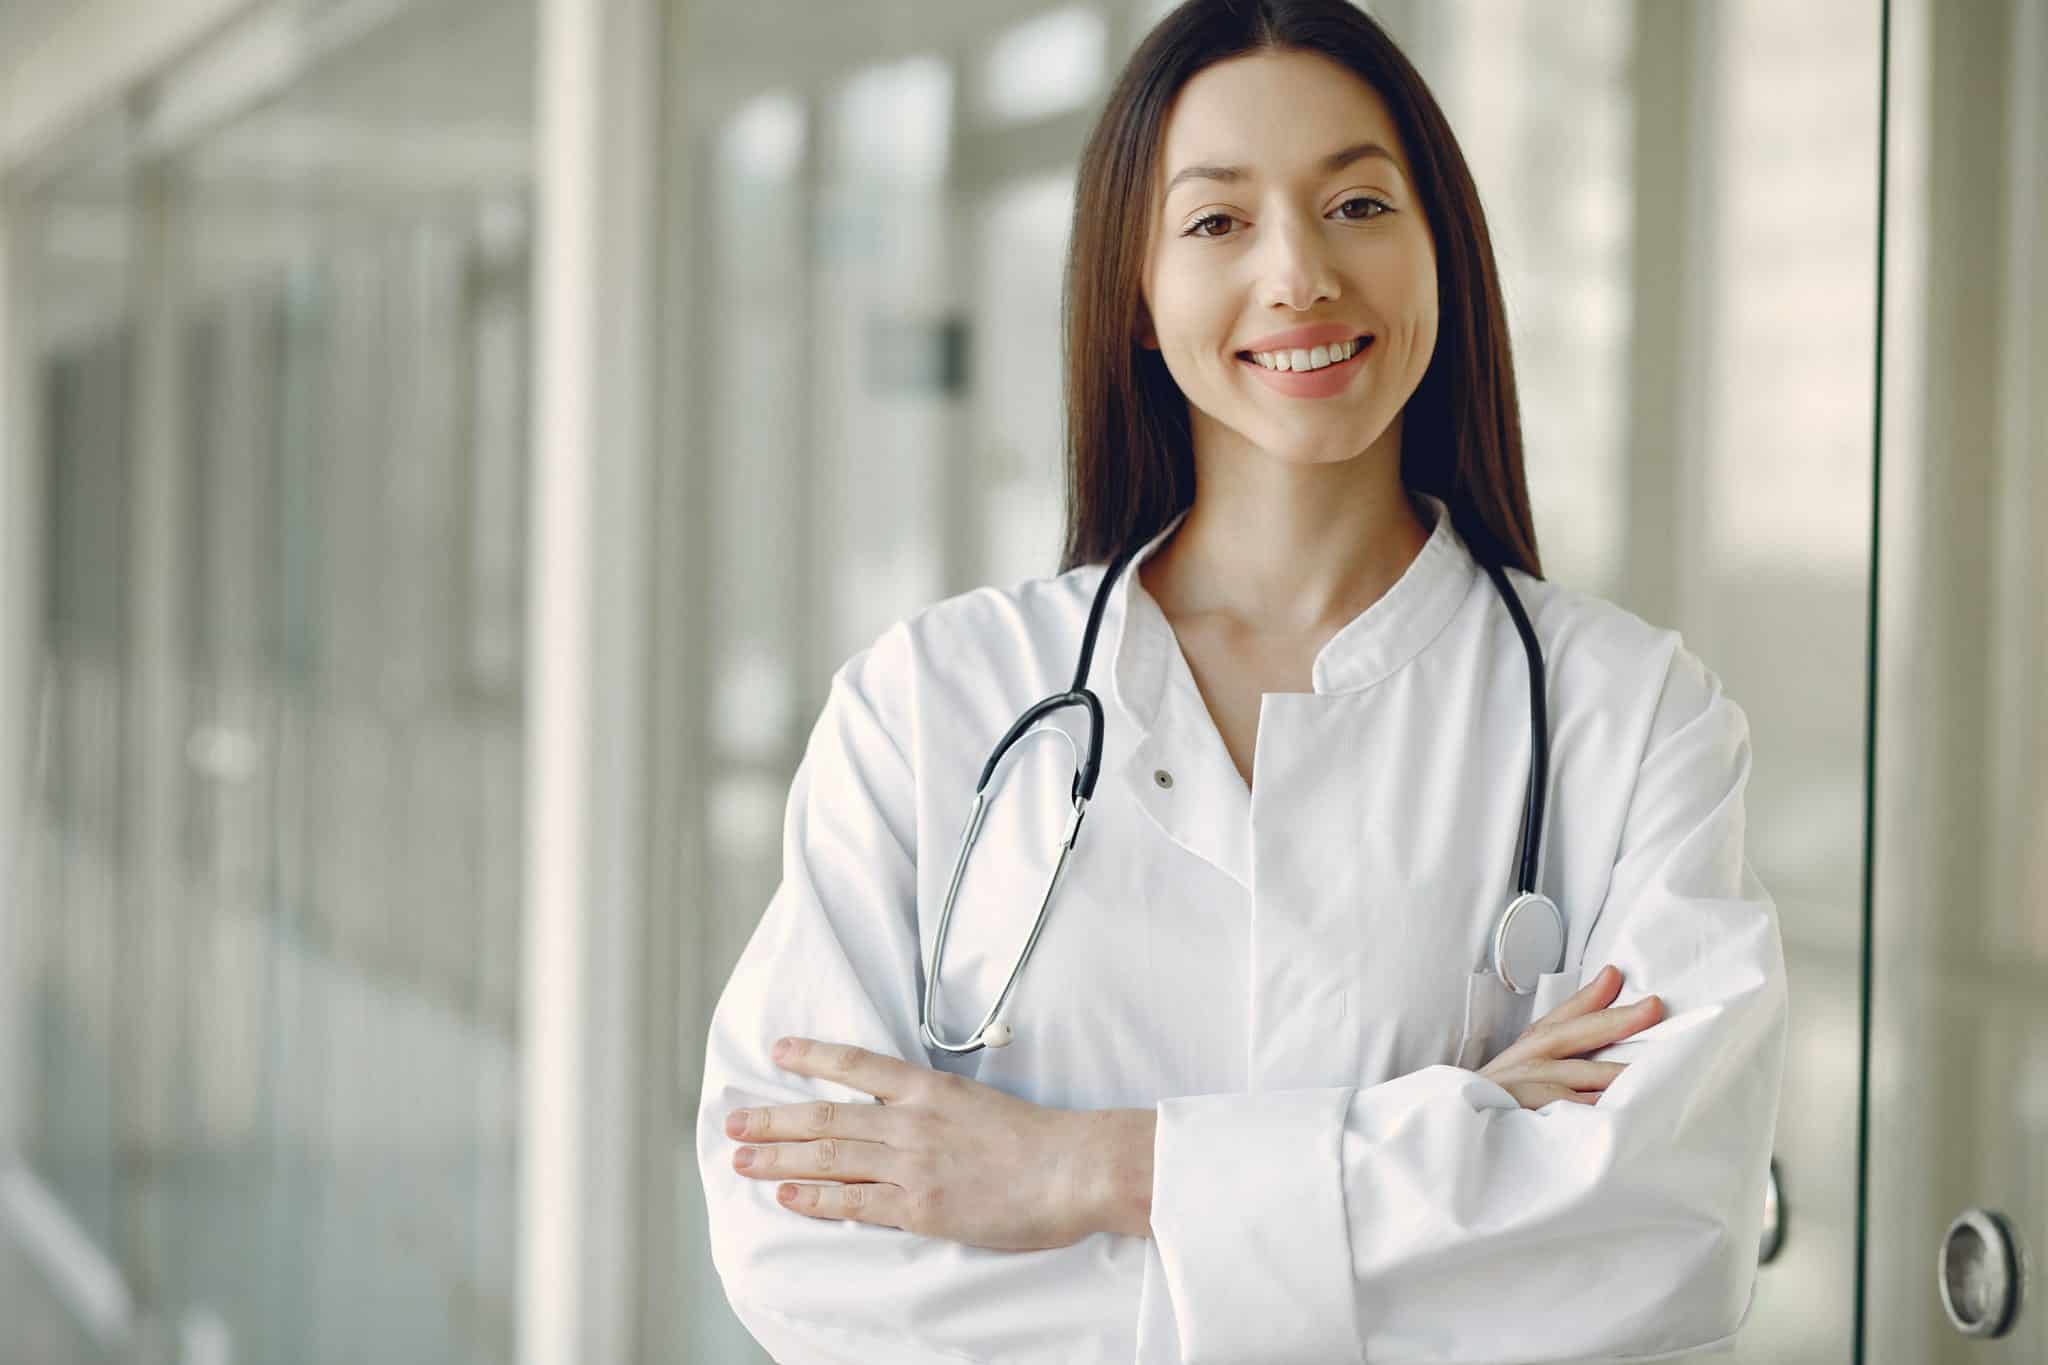 Young doctor smiles as she stands in hallway outside of glass door